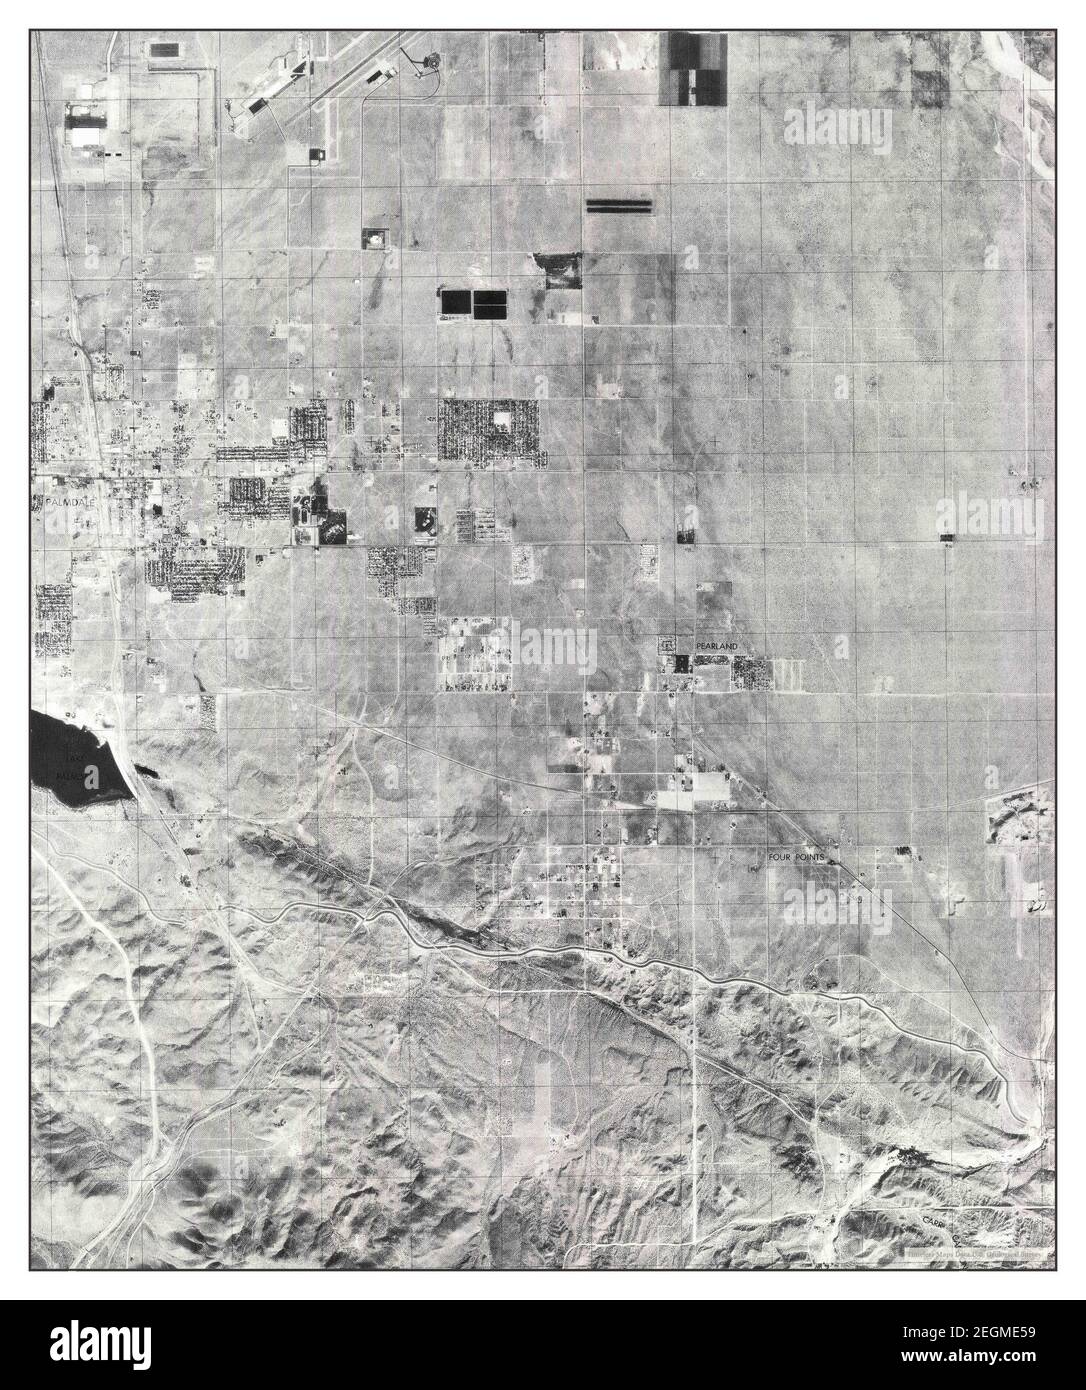 Palmdale, California, map 1978, 1:24000, United States of America by Timeless Maps, data U.S. Geological Survey Stock Photo